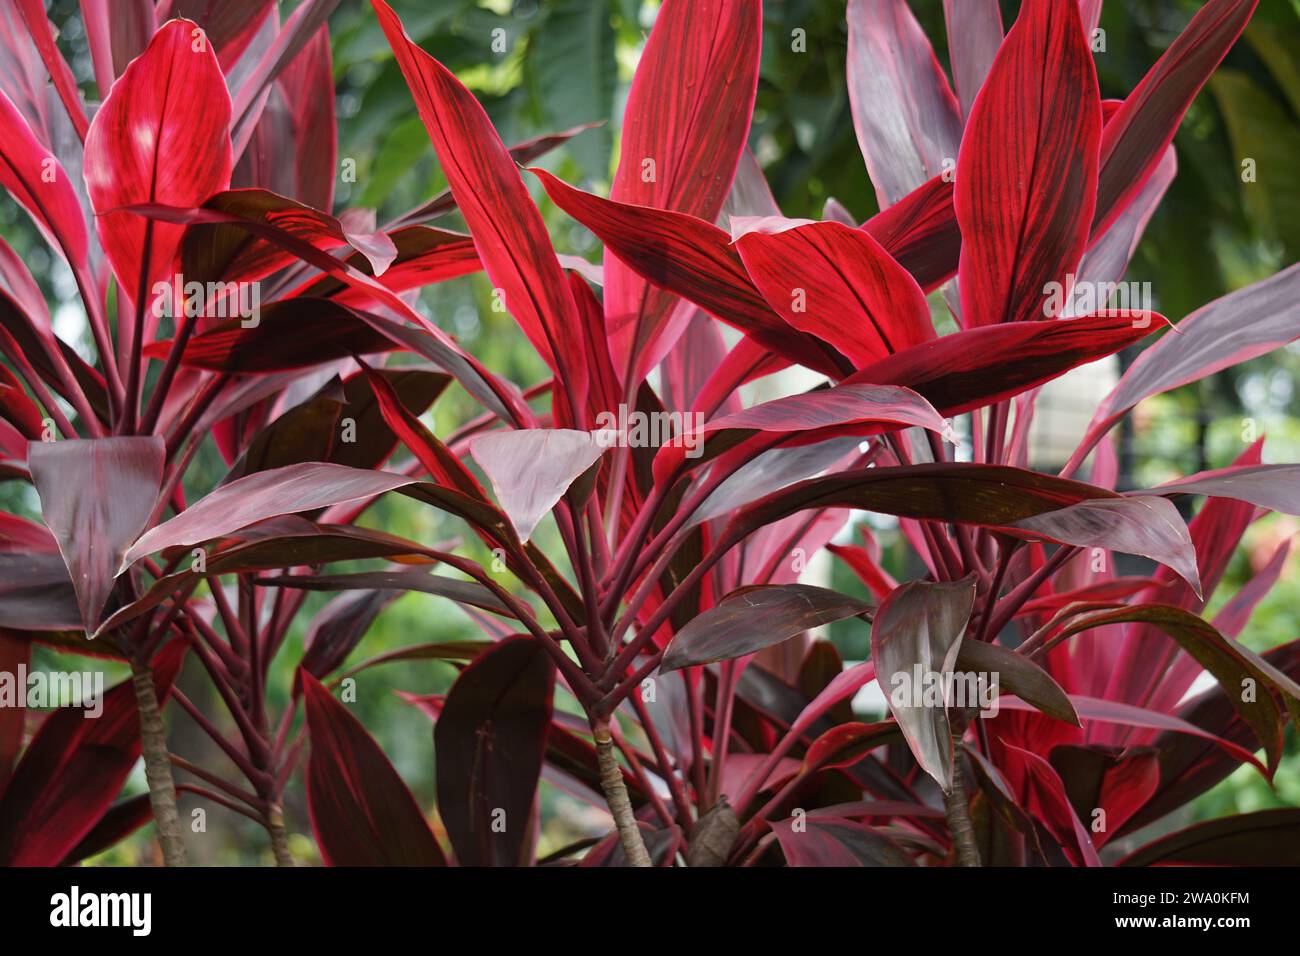 Cordyline fruticosa commonly called ti plant, palm lily, cabbage palm, good luck plant, Convallaria fruticosa L., Asparagus terminalis L and andong Stock Photo